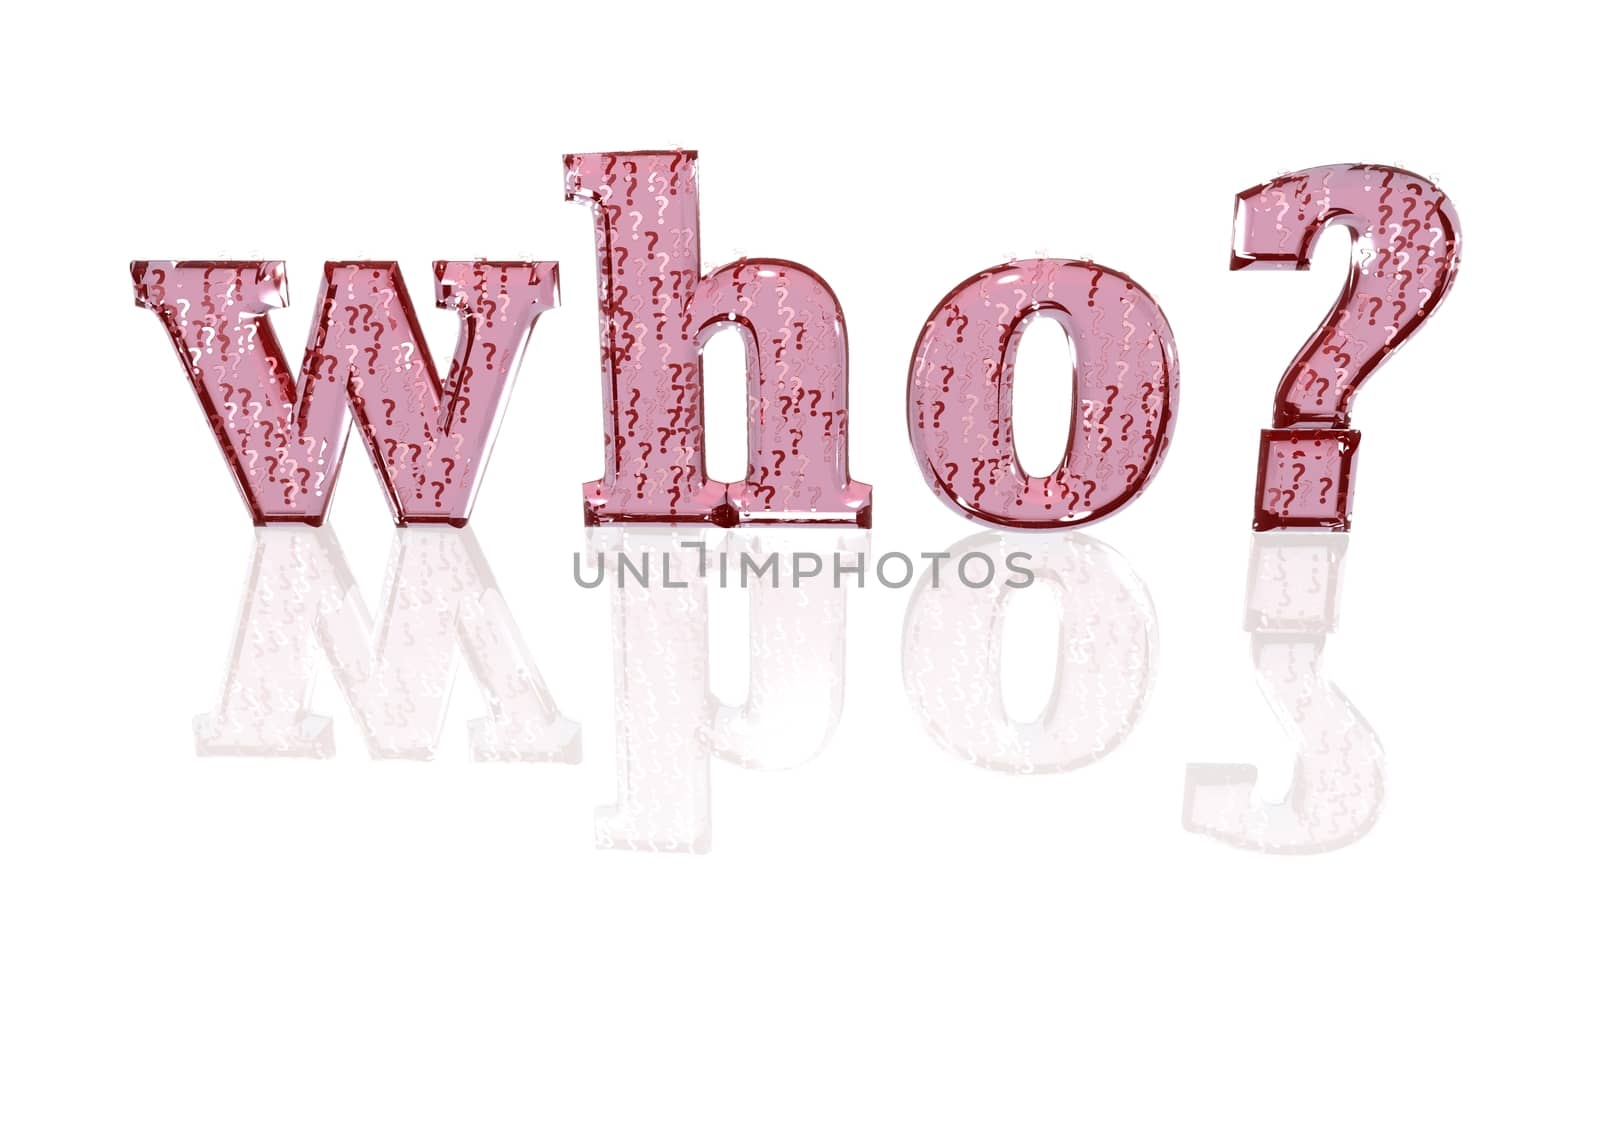 The question who? consisting of a set of small question marks